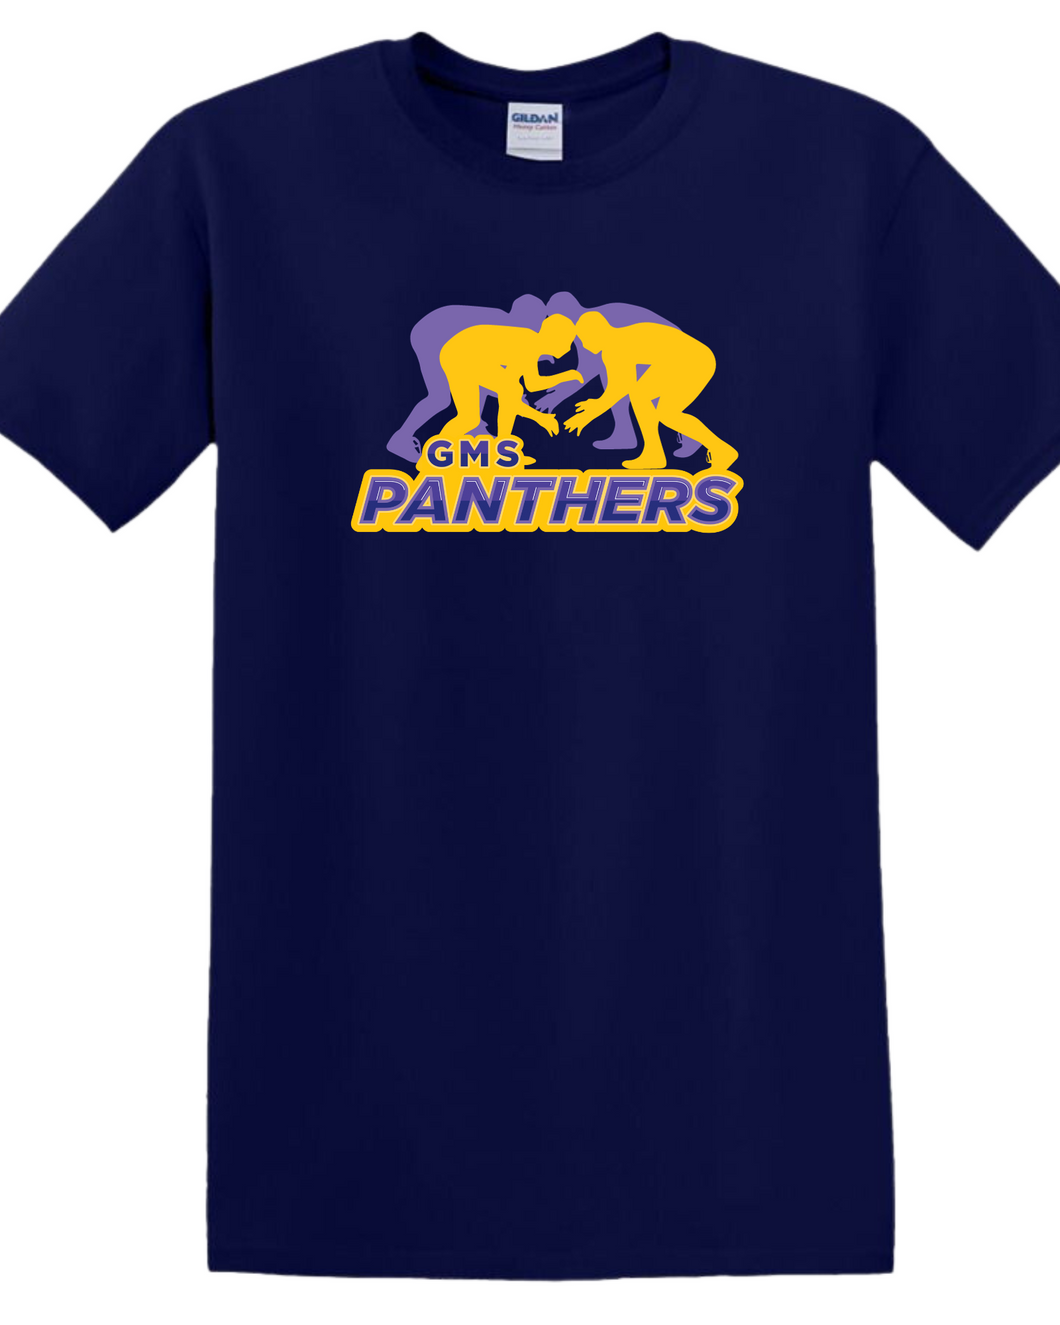 GMS Panthers (Wrestling Silhouette)